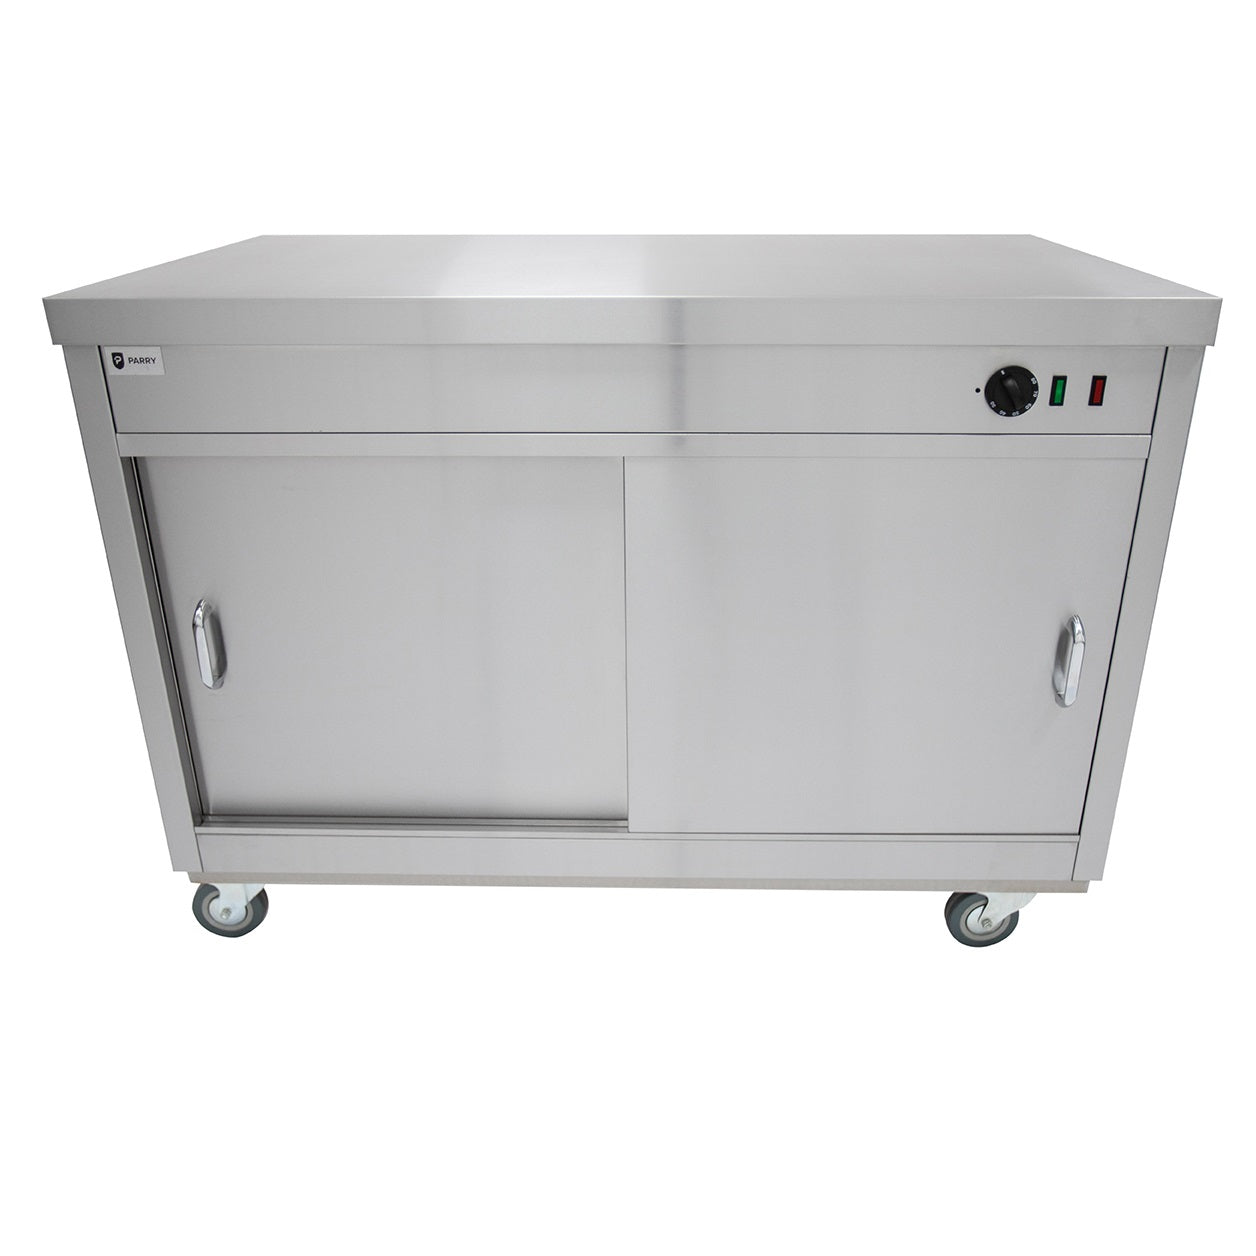 Parry Mobile Hot Cupboard HOT15